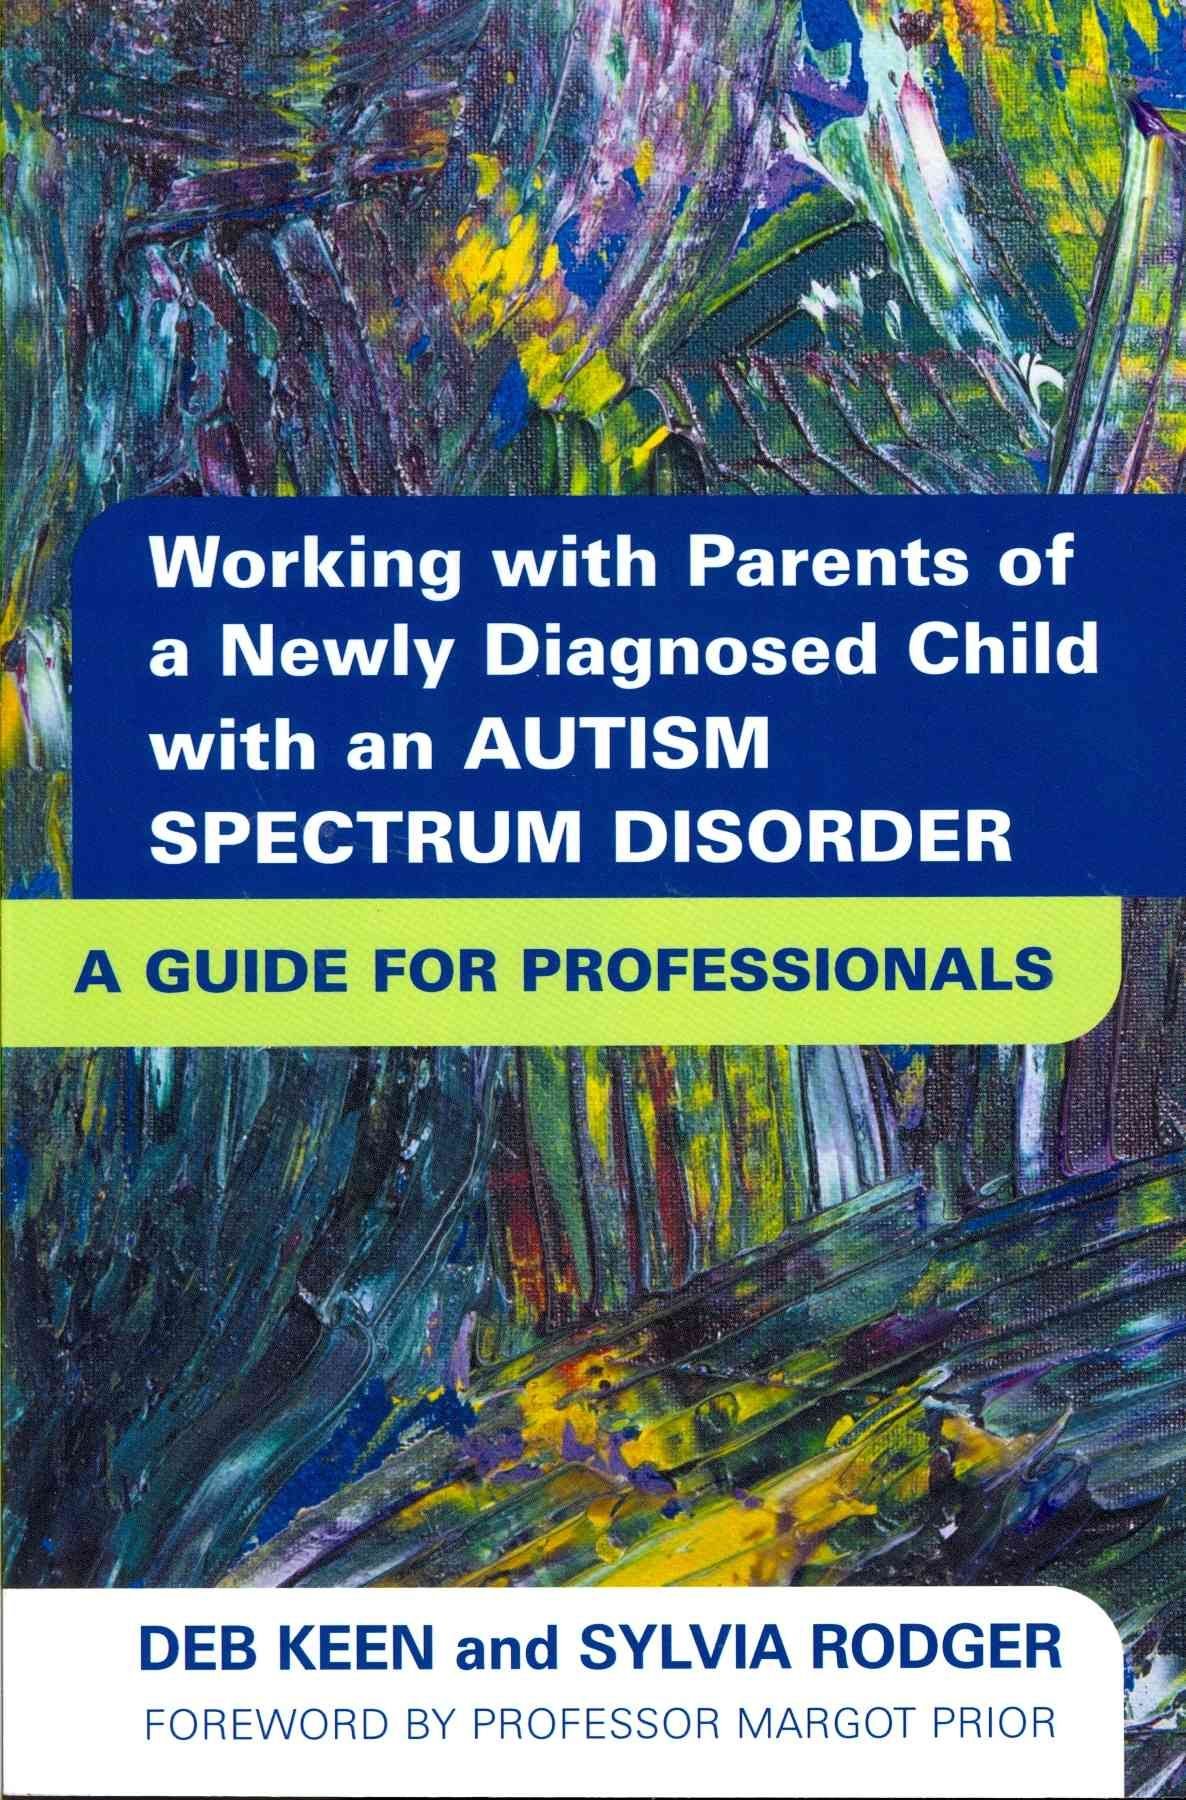 Working with Parents of a Newly Diagnosed Child with an Autism Spectrum Disorder